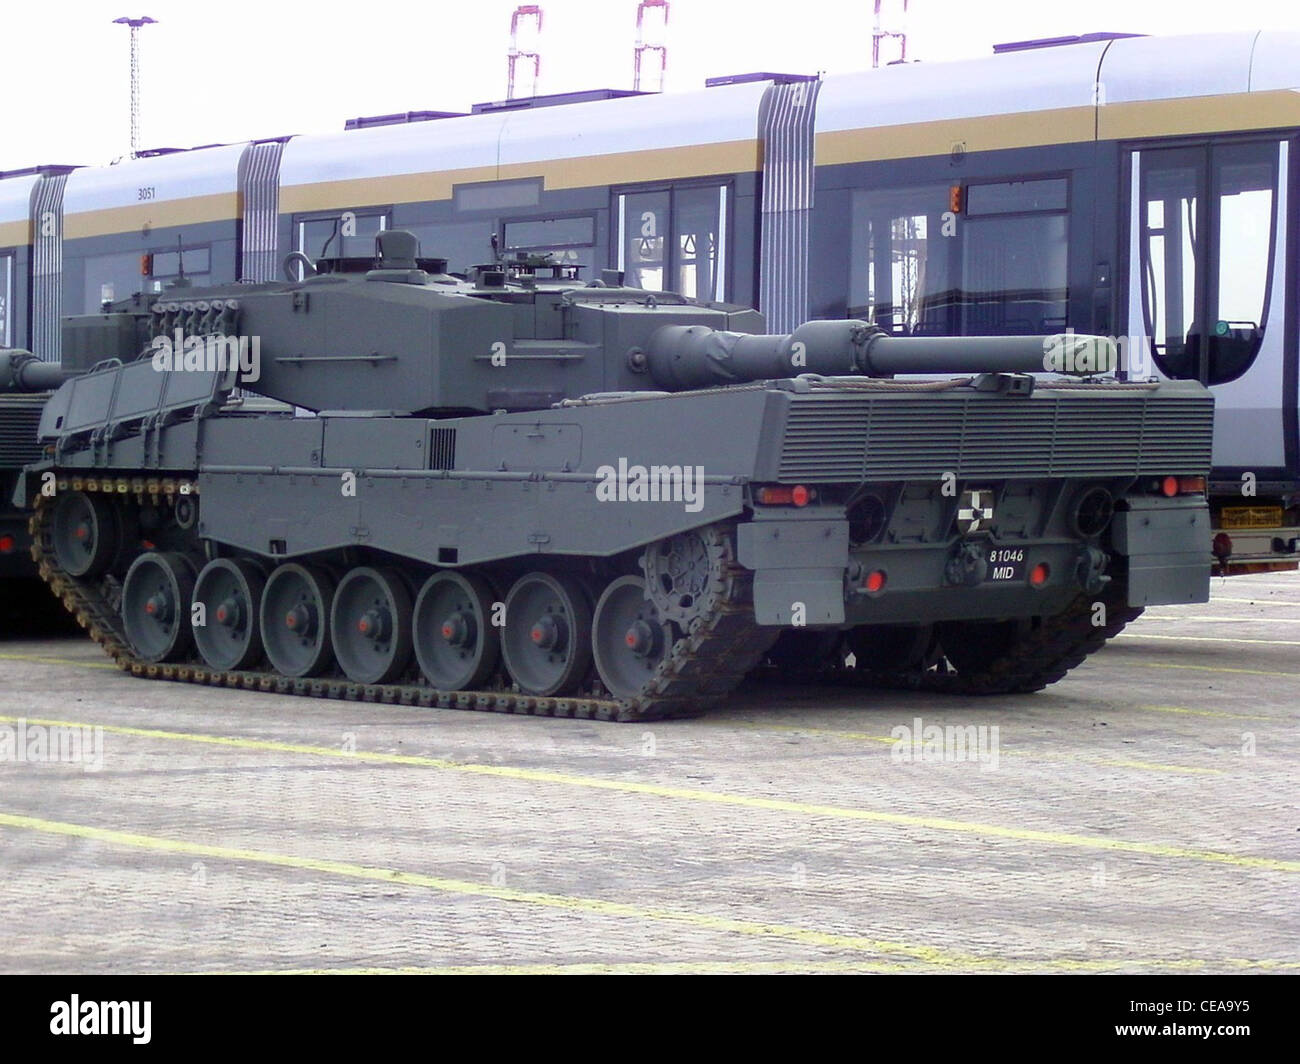 German Leopard 2A4 Main Battle Tank, part of the Singapore Armed Force's, seen in 2010 Stock Photo